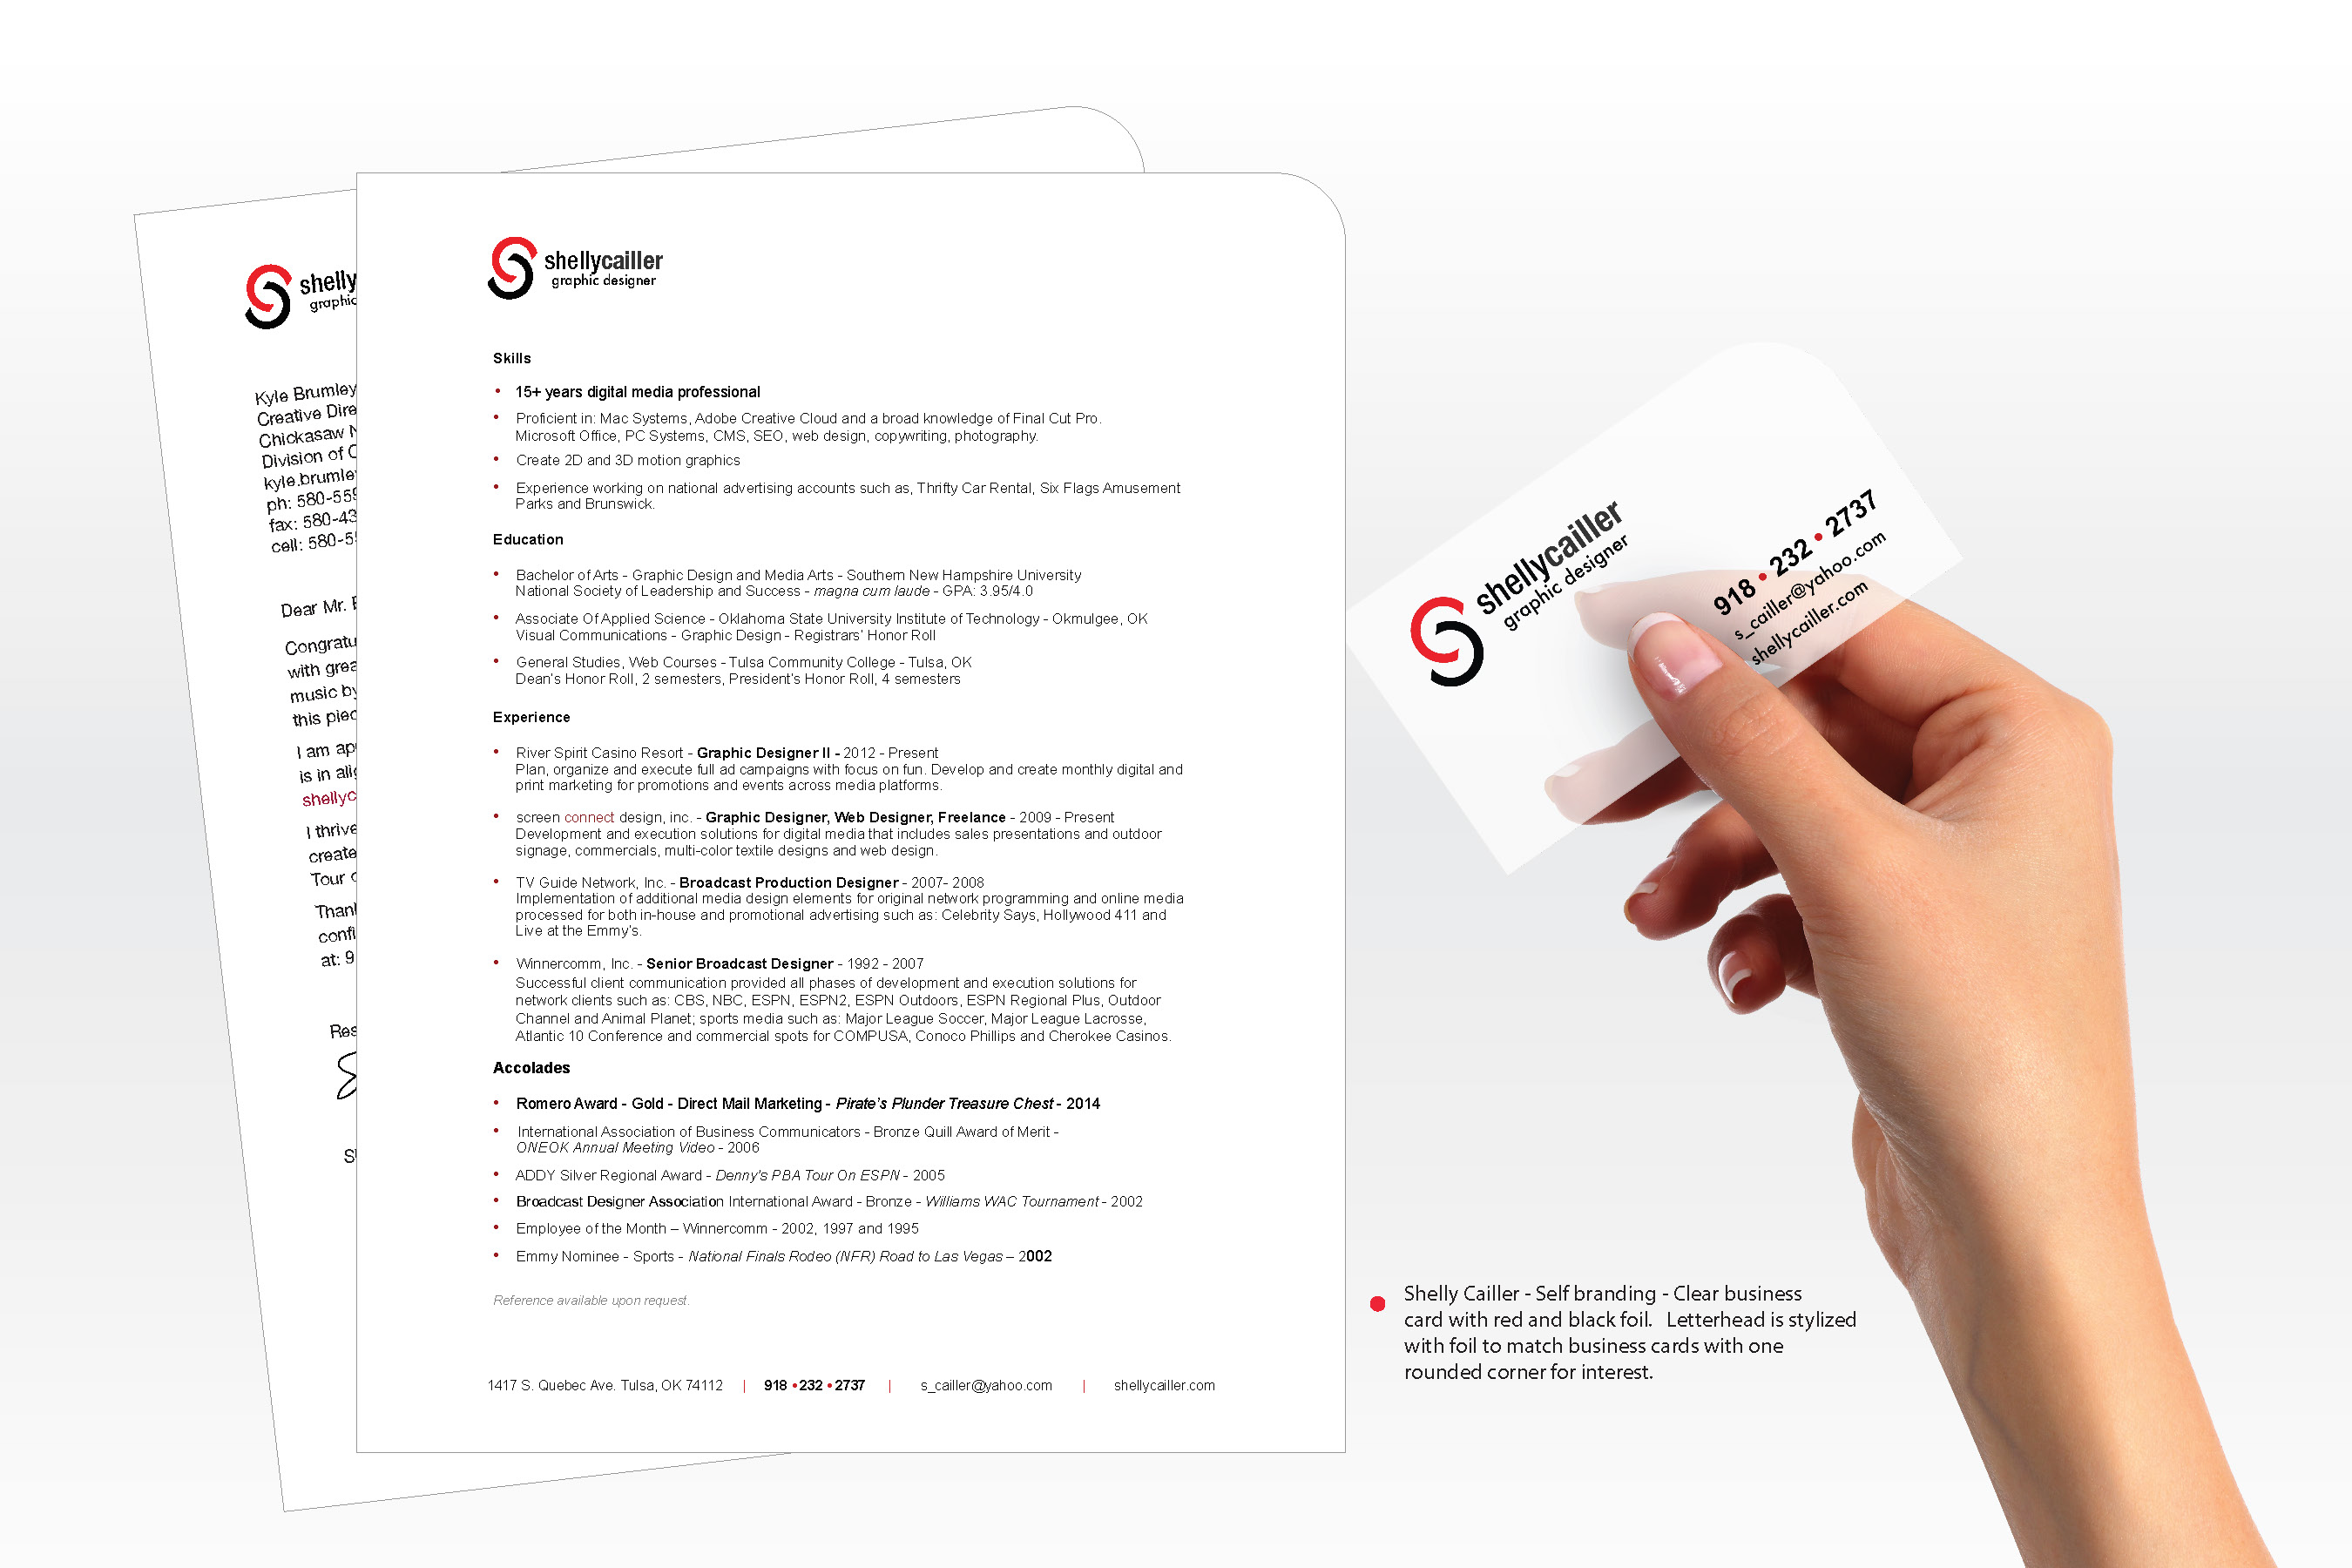 Shelly Cailler business card and letterhead- All rights reserved - Shelly L. Cailler © 2016